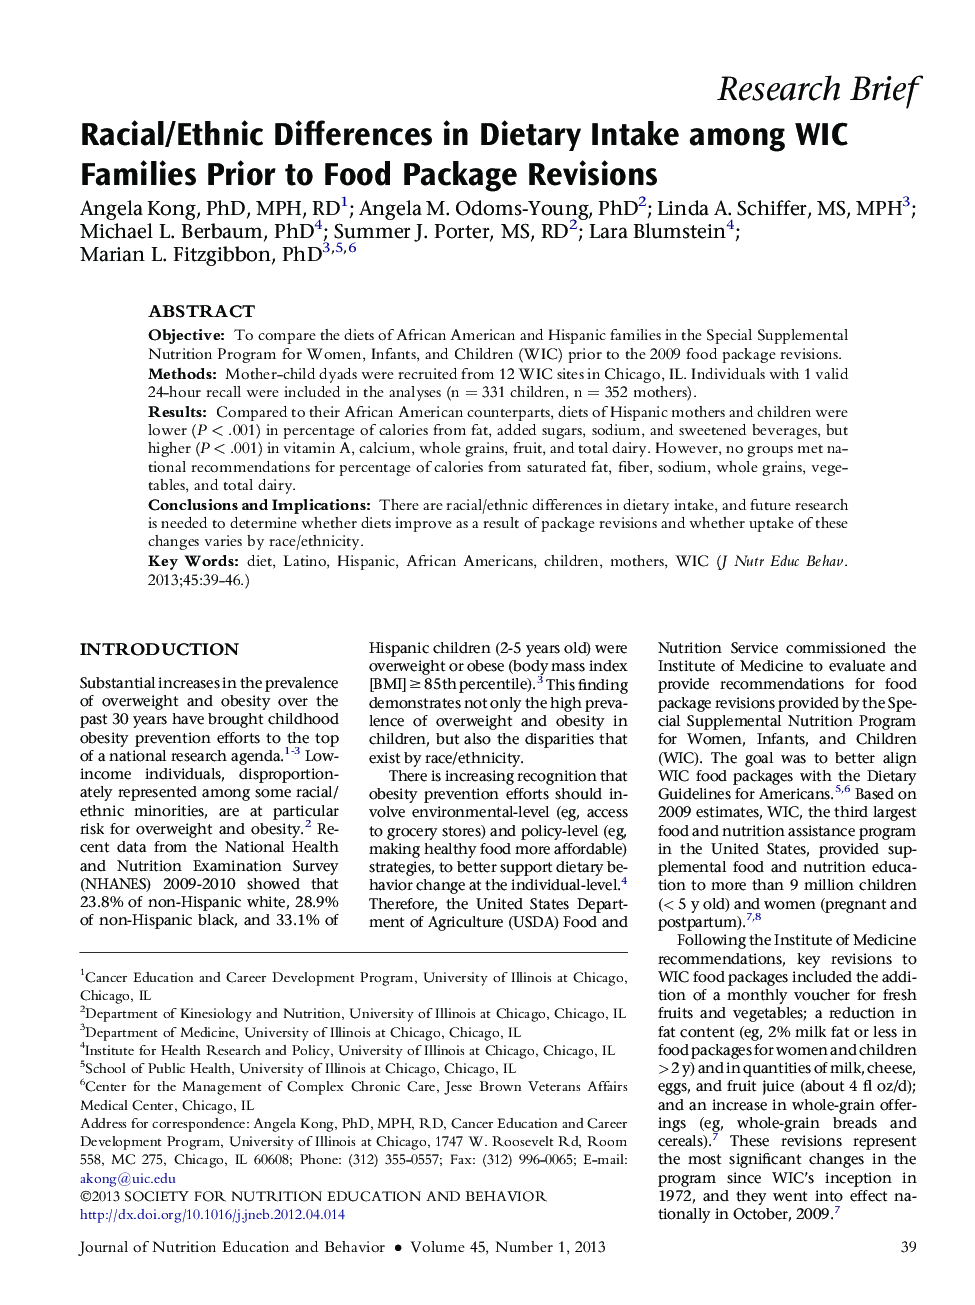 Racial/Ethnic Differences in Dietary Intake among WIC Families Prior to Food Package Revisions